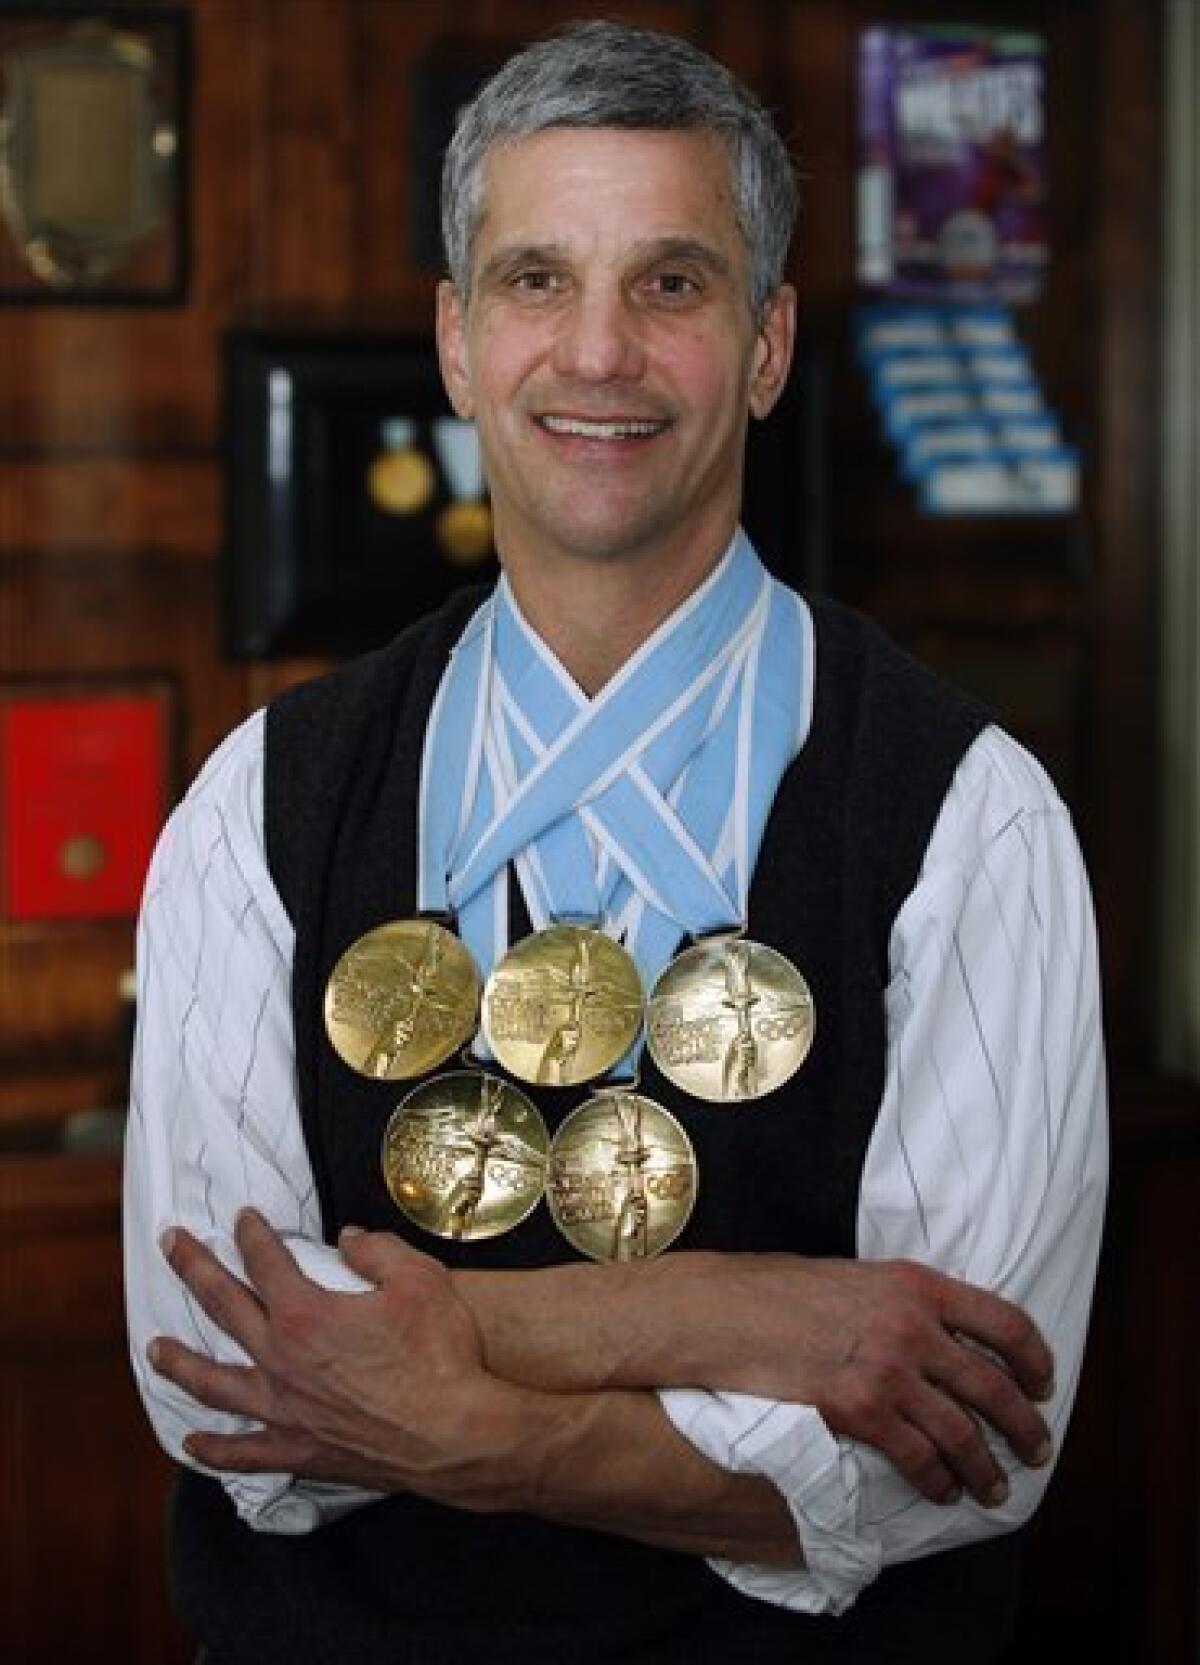 Dr. Eric Heiden, winner of 5 gold medals in speed skating at the 1980 Olympic Games in Lake Placid, is shown with his medals infront of a display case of memorabilia at his medical practice Friday, Jan. 29, 2010, in Park City, Utah. Heiden also raced bicycles in the 1986 Tour de France before going on to medical school and becoming an Orthopedic Surgeon. (AP Photo/Steve C. Wilson)